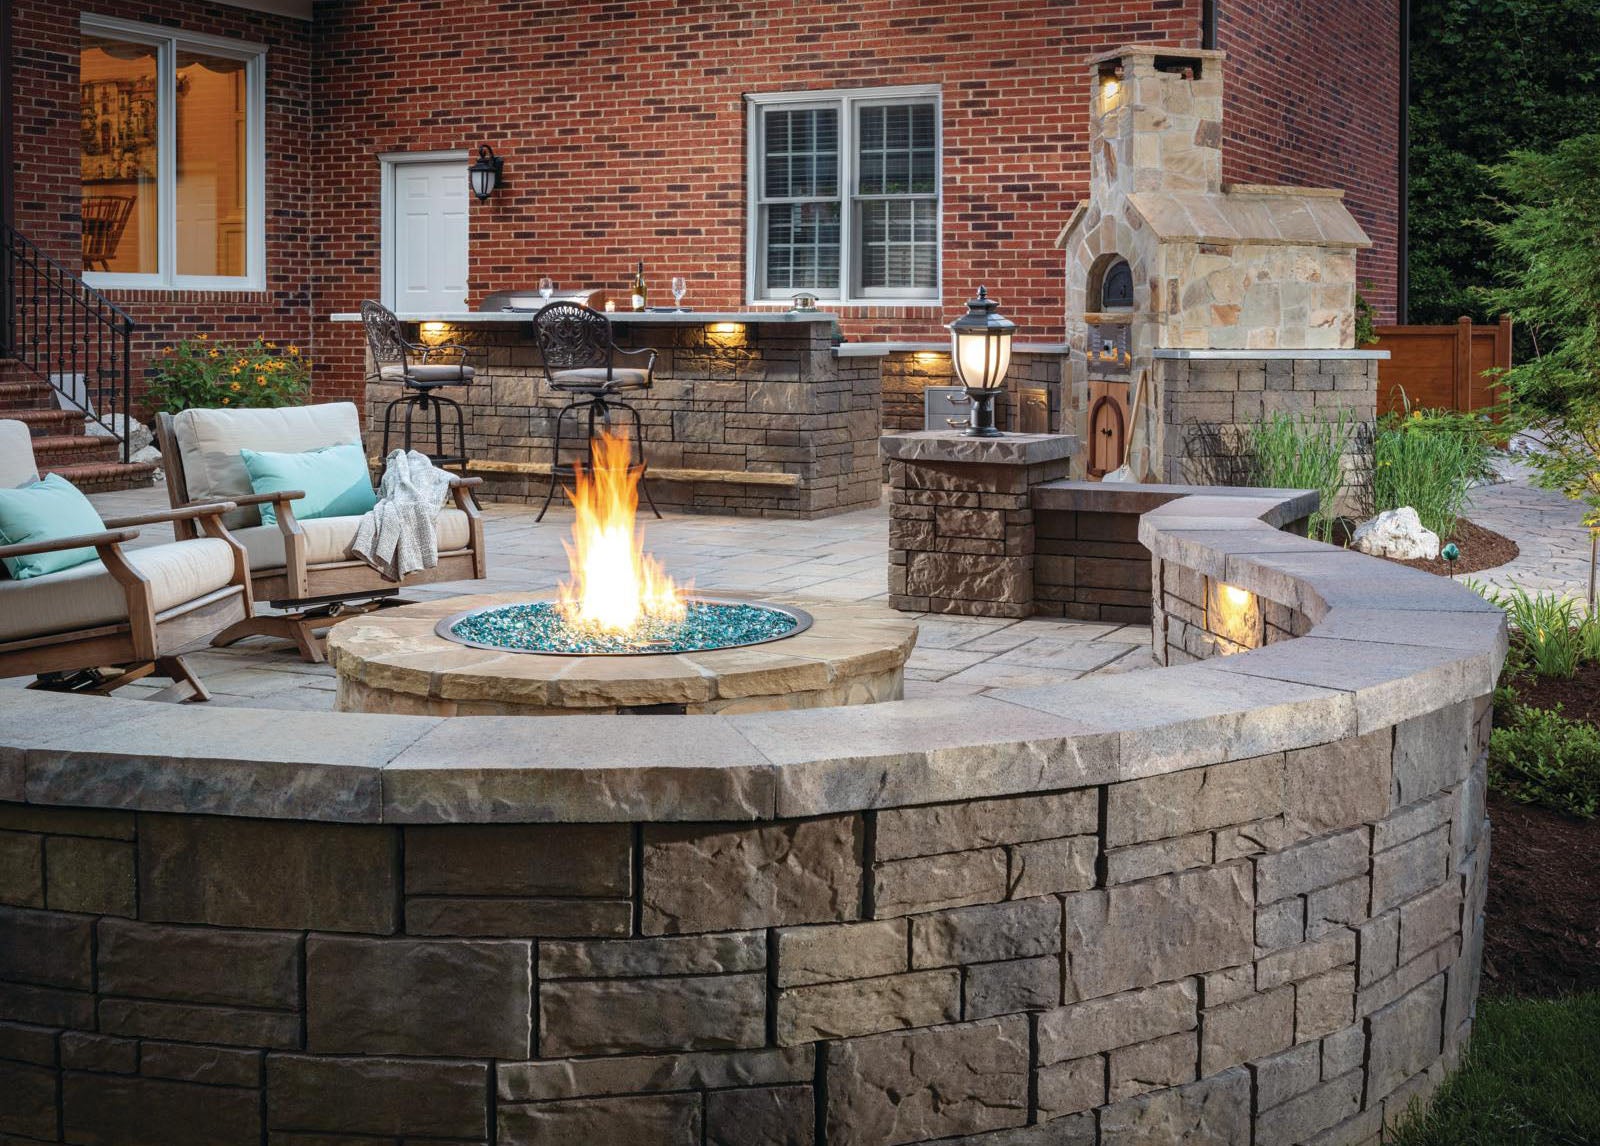 Designing A Patio Around Fire Pit, Outdoor Stone Fire Pit Design Ideas